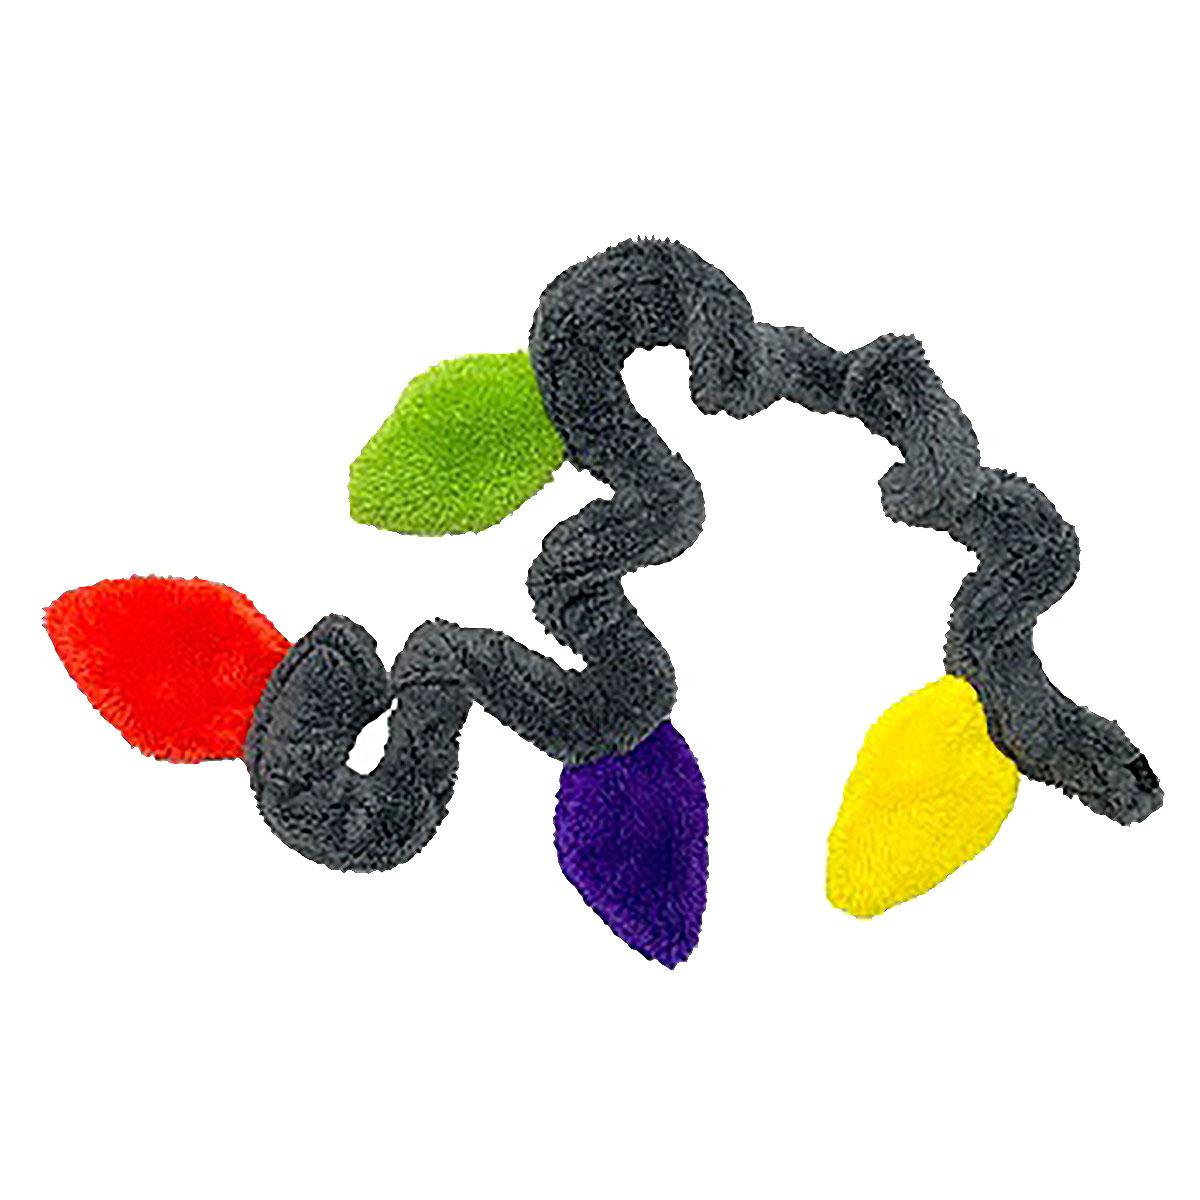 Cycle Dog Duraplush Holiday Stuffing Free Dog Toy - String of Lights